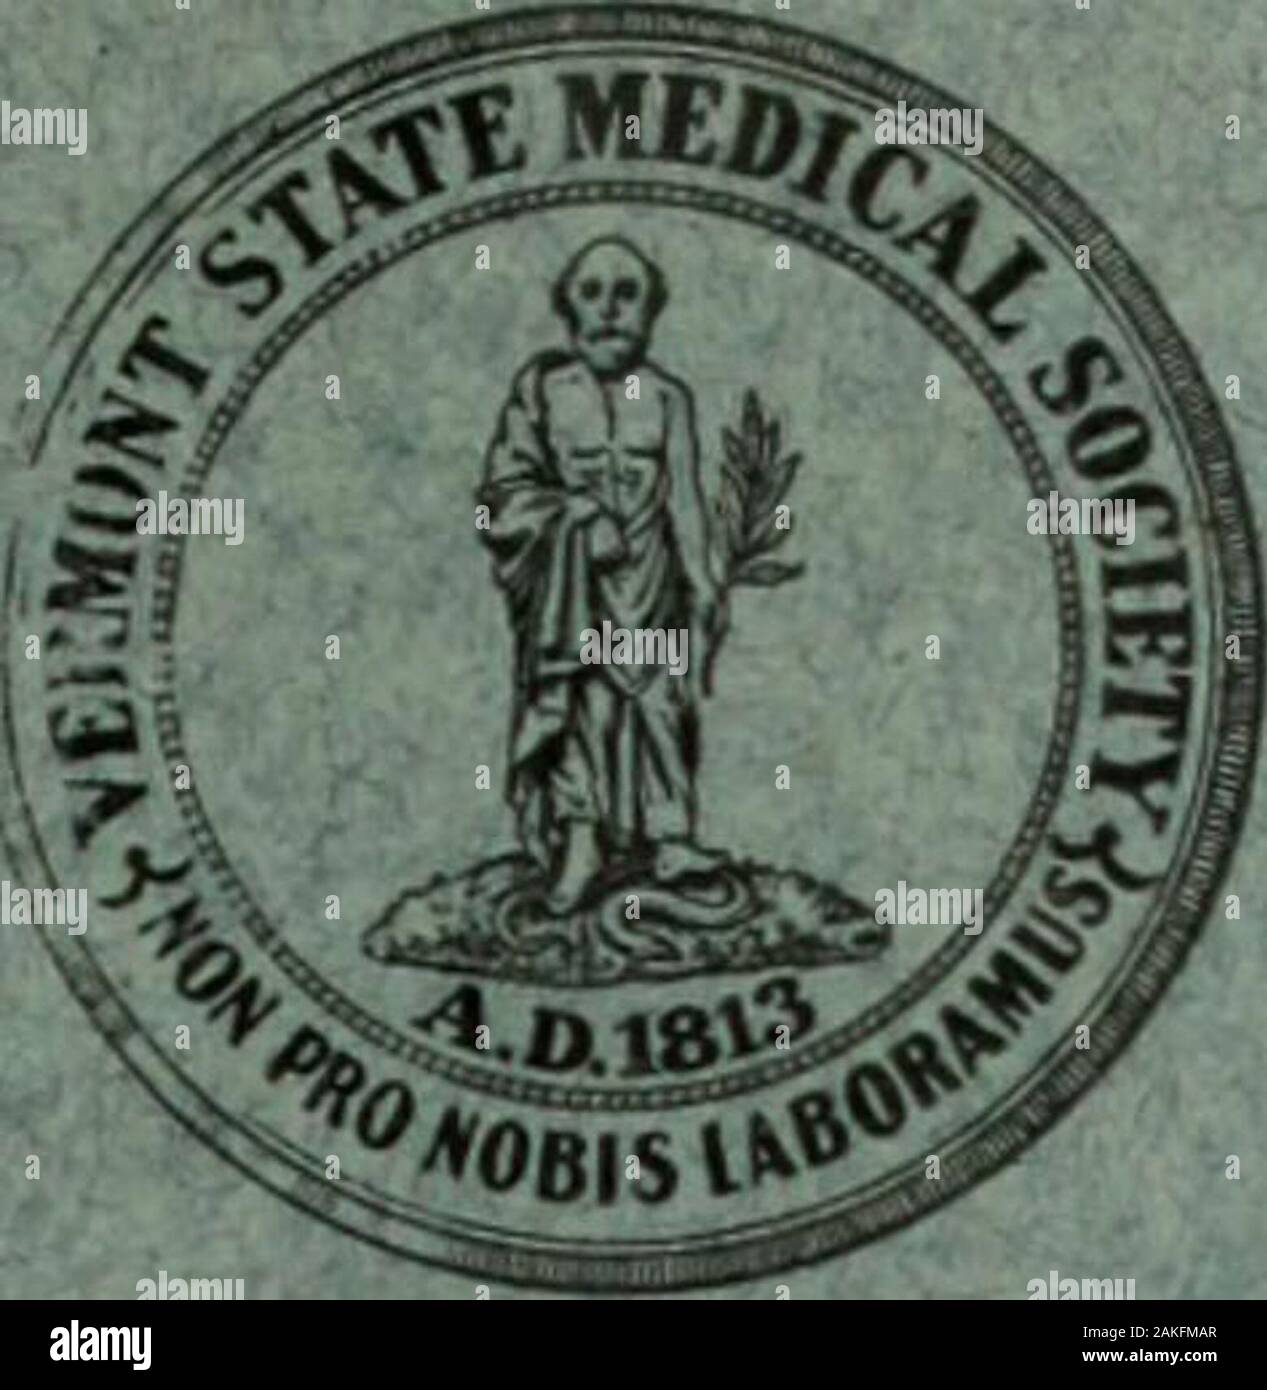 Vermont medicine . Iodid.—The Council onPharmacy and Chemistry reports that becauseof the apparently good results obtained withit. emetin bismuth iodid has been accepted forXew and Xon-official Remedies. Emetin bis-muth iodid is insoluble in water and diluteacids, but is decomposed by alkalis, and thusshould pass the stomach unchanged but exertits action in the intestines. Those who havereported on the use of the drug in amebic dys-entery report that the disappearance of amebafrom stools was generally complete and ap-parently permanent even in chronic cases ofcarriers and in cases where the hy Stock Photo